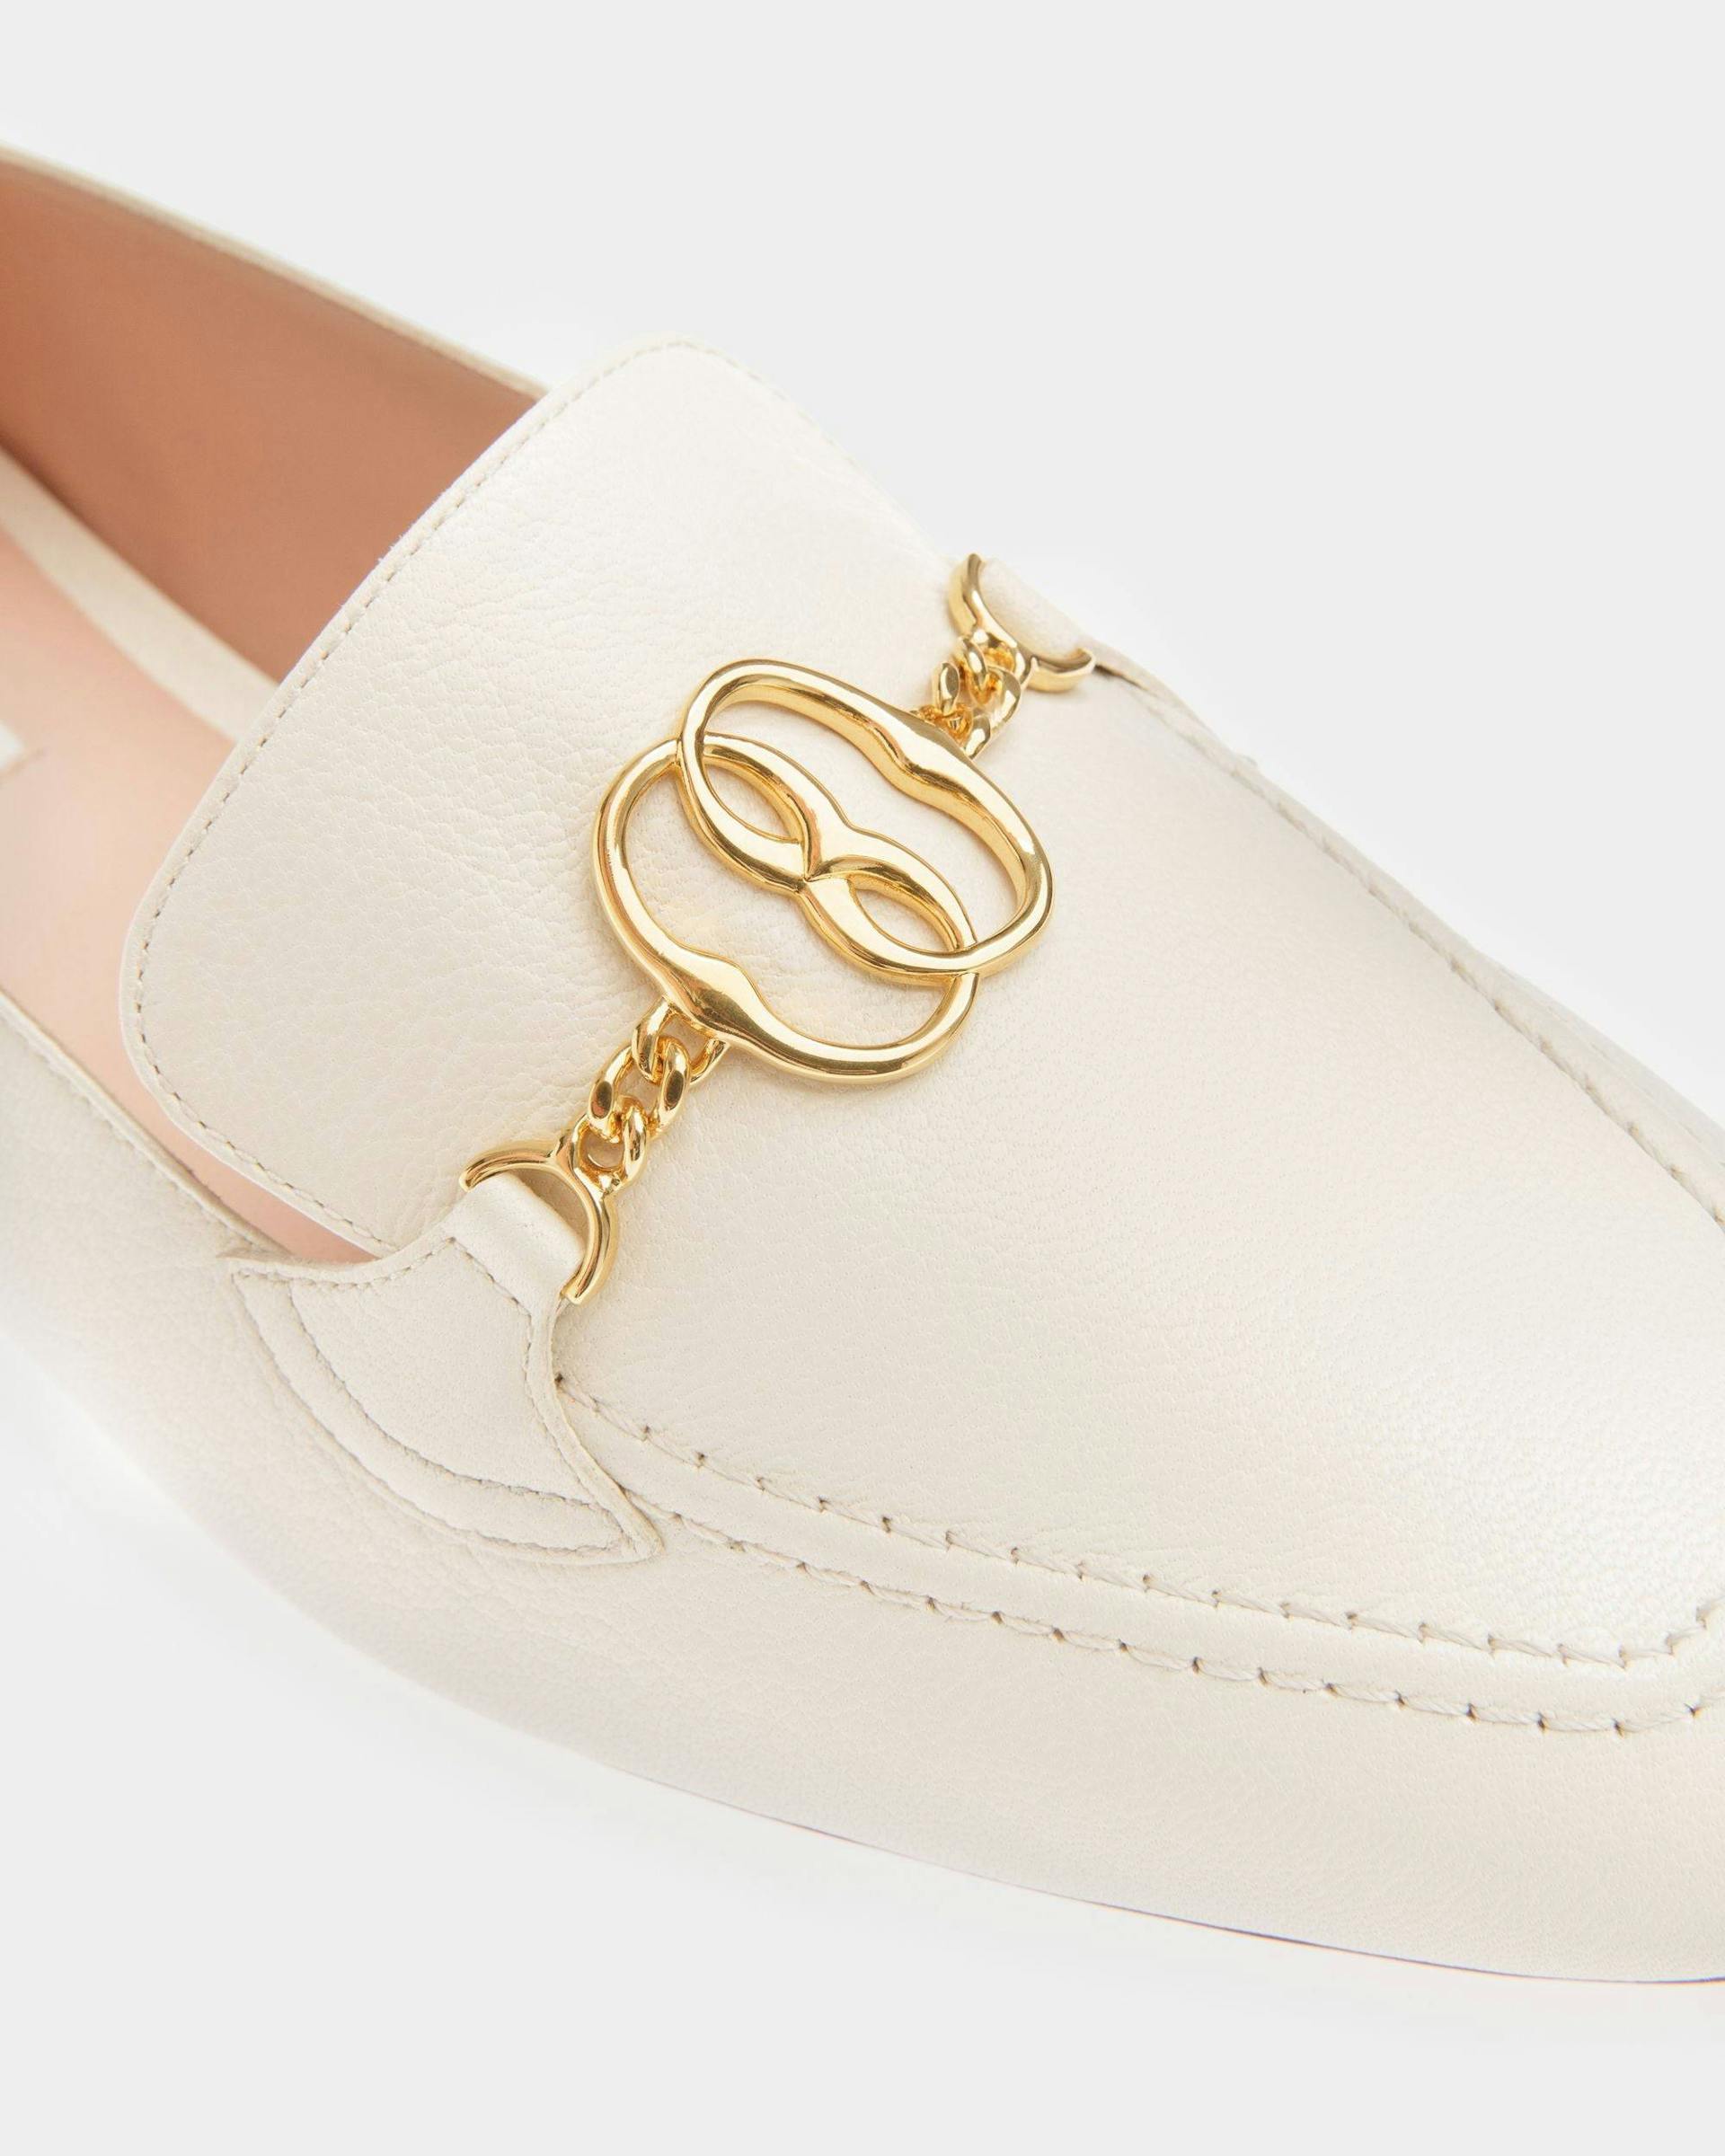 Women's Emblem Loafers In Bone Leather | Bally | Still Life Detail